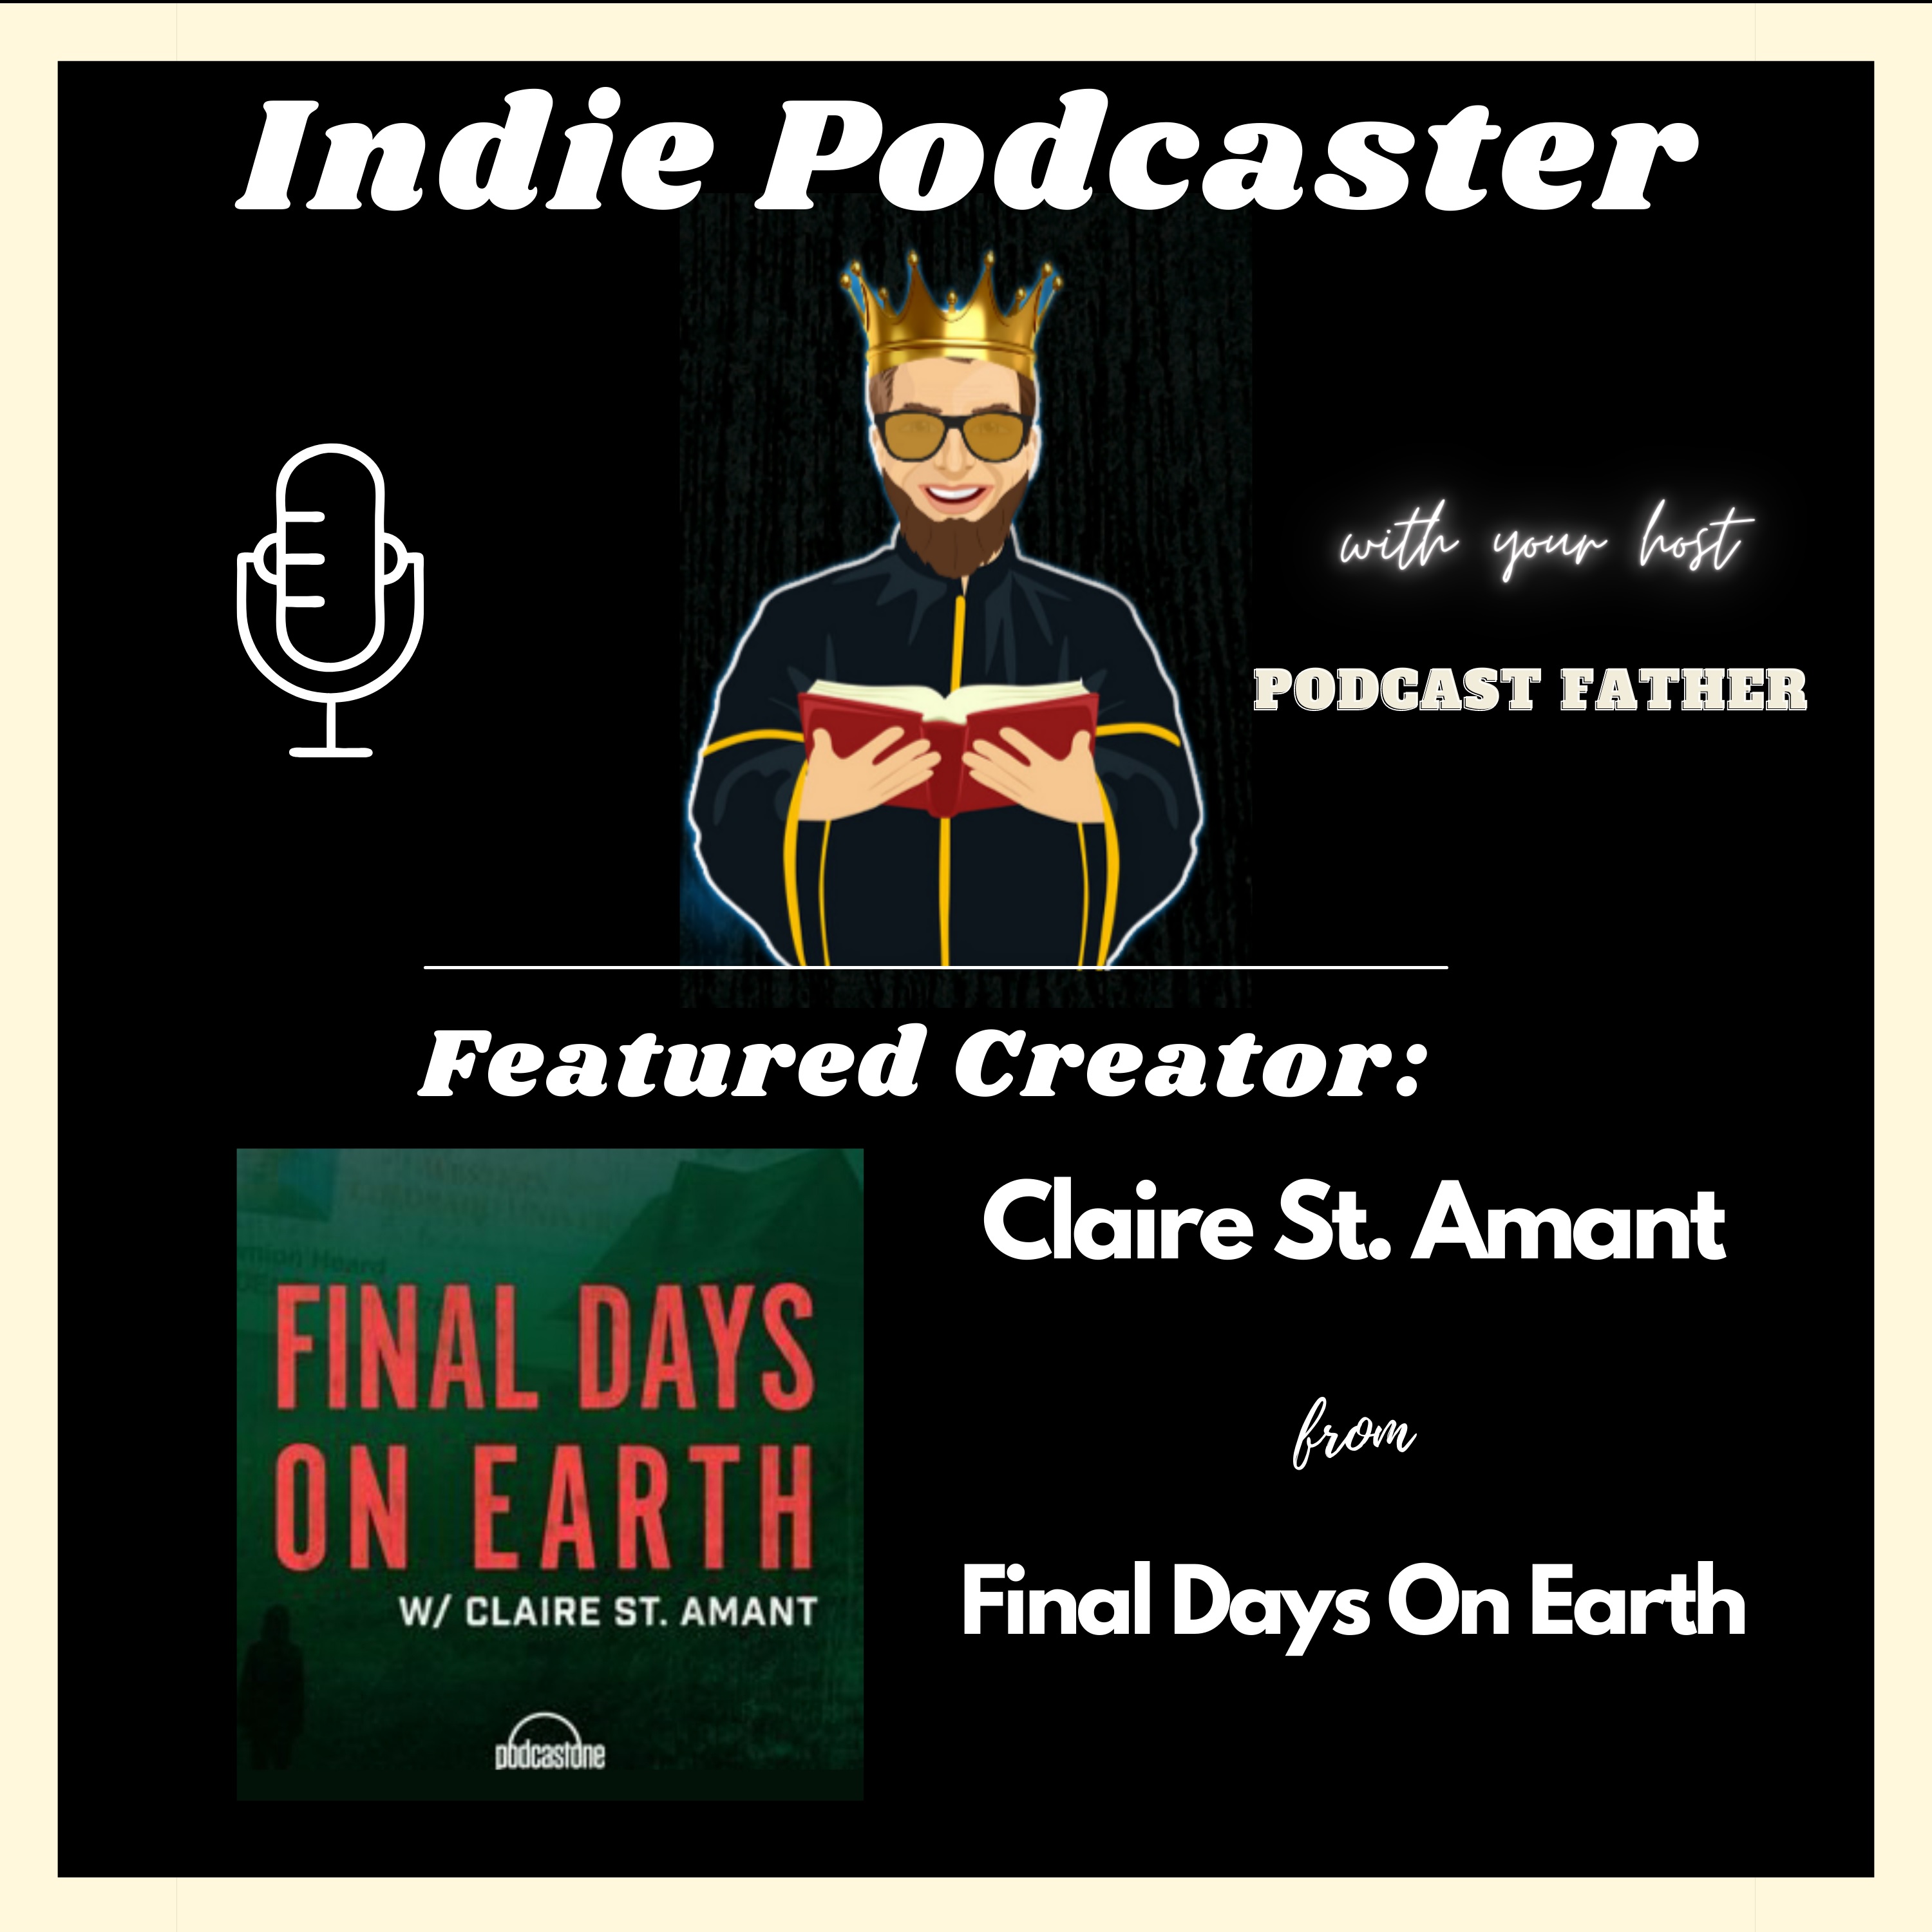 Claire St. Amant from Final Days on Earth Podcast Image